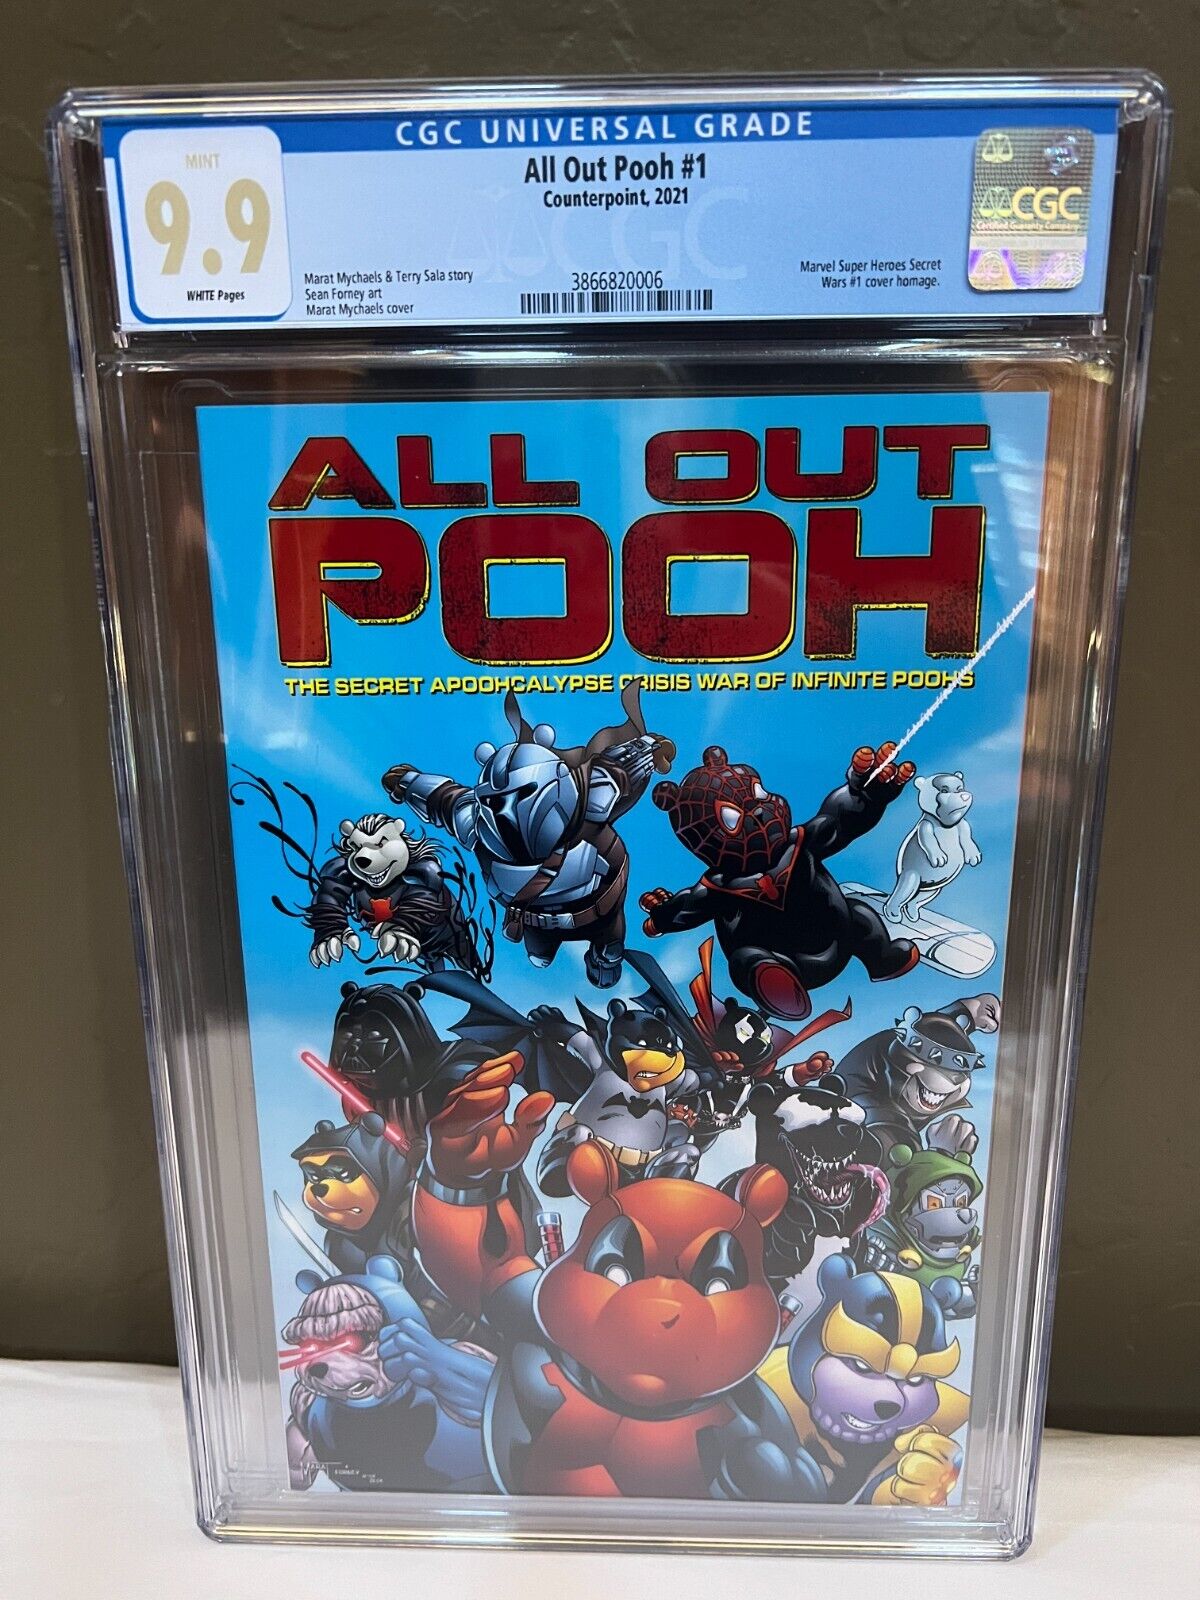 All Out Pooh #1 CGC 9.9; Marvel Super Heroes Wars #1; Do You Pooh Mint Rare 9.9